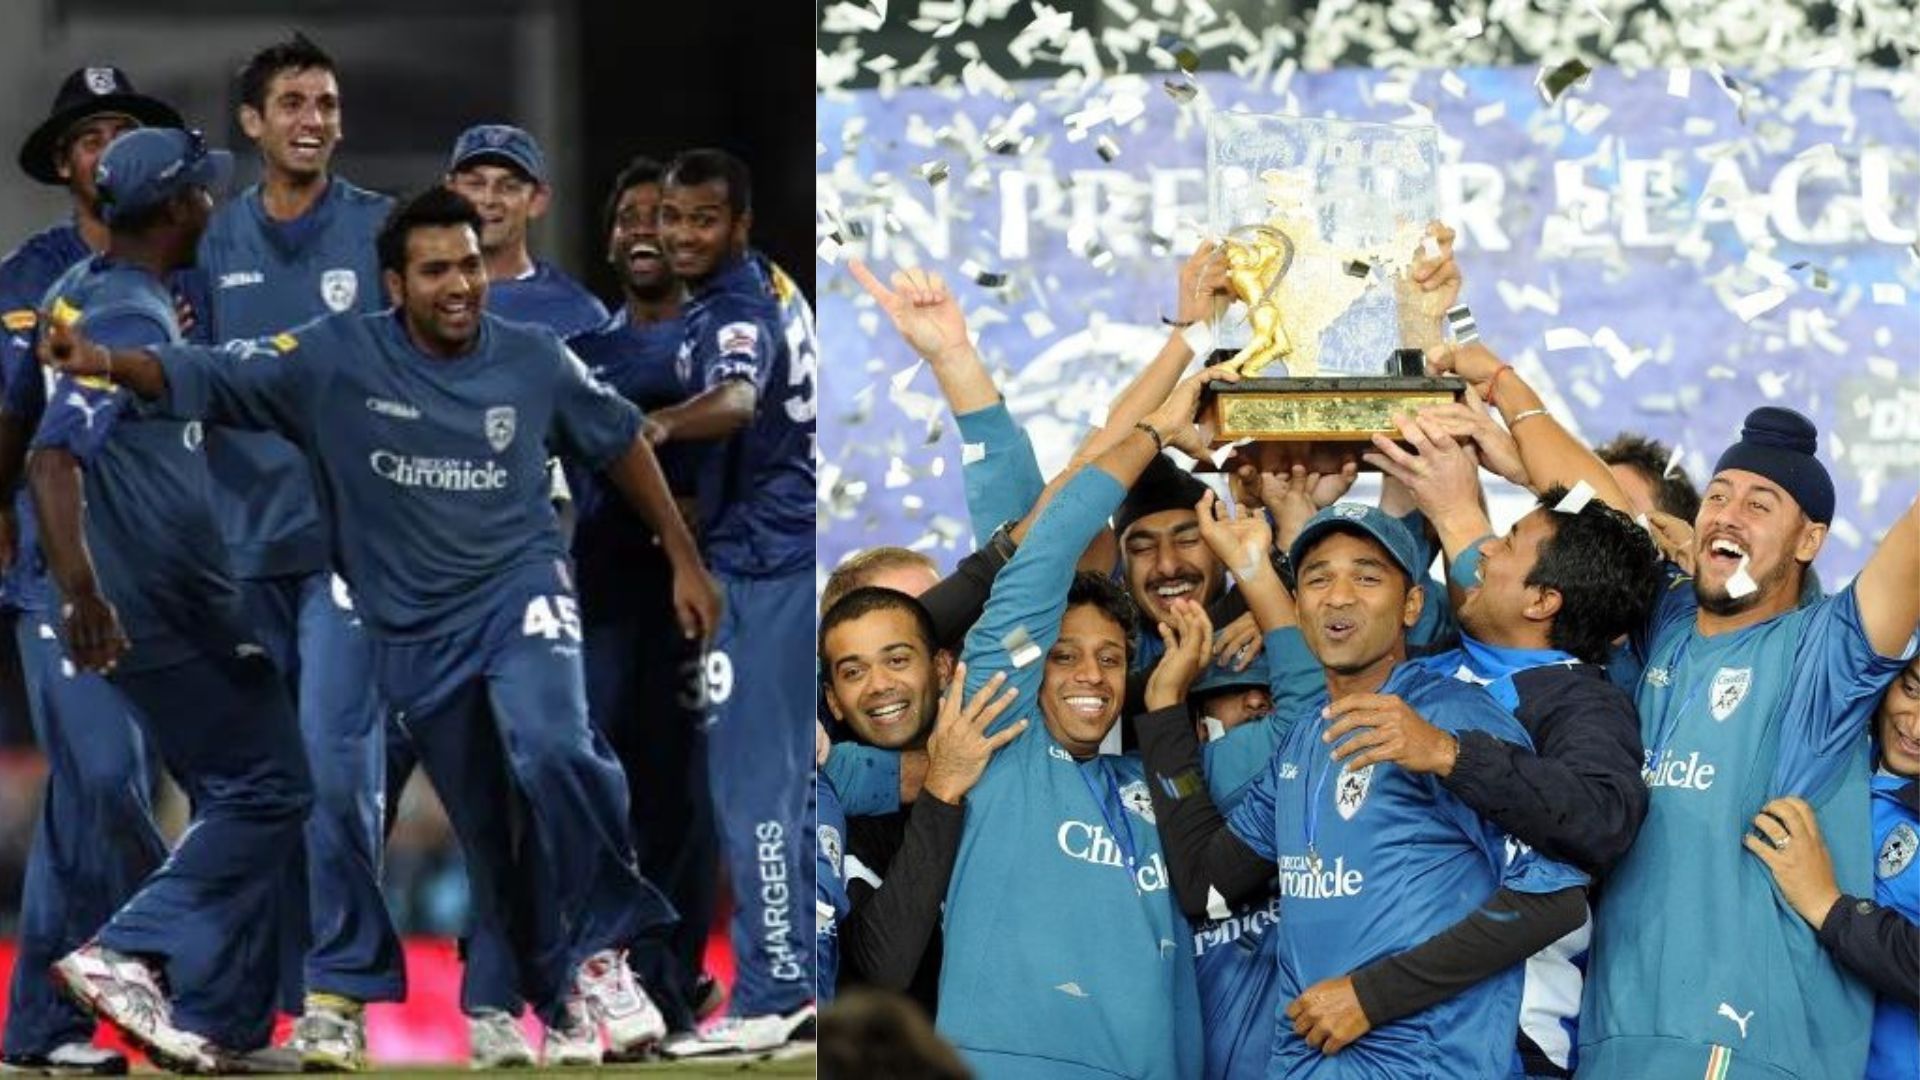 Rohit Sharma won his maiden IPL title with the Deccan Chargers in 2009 (P.C.:Twitter)